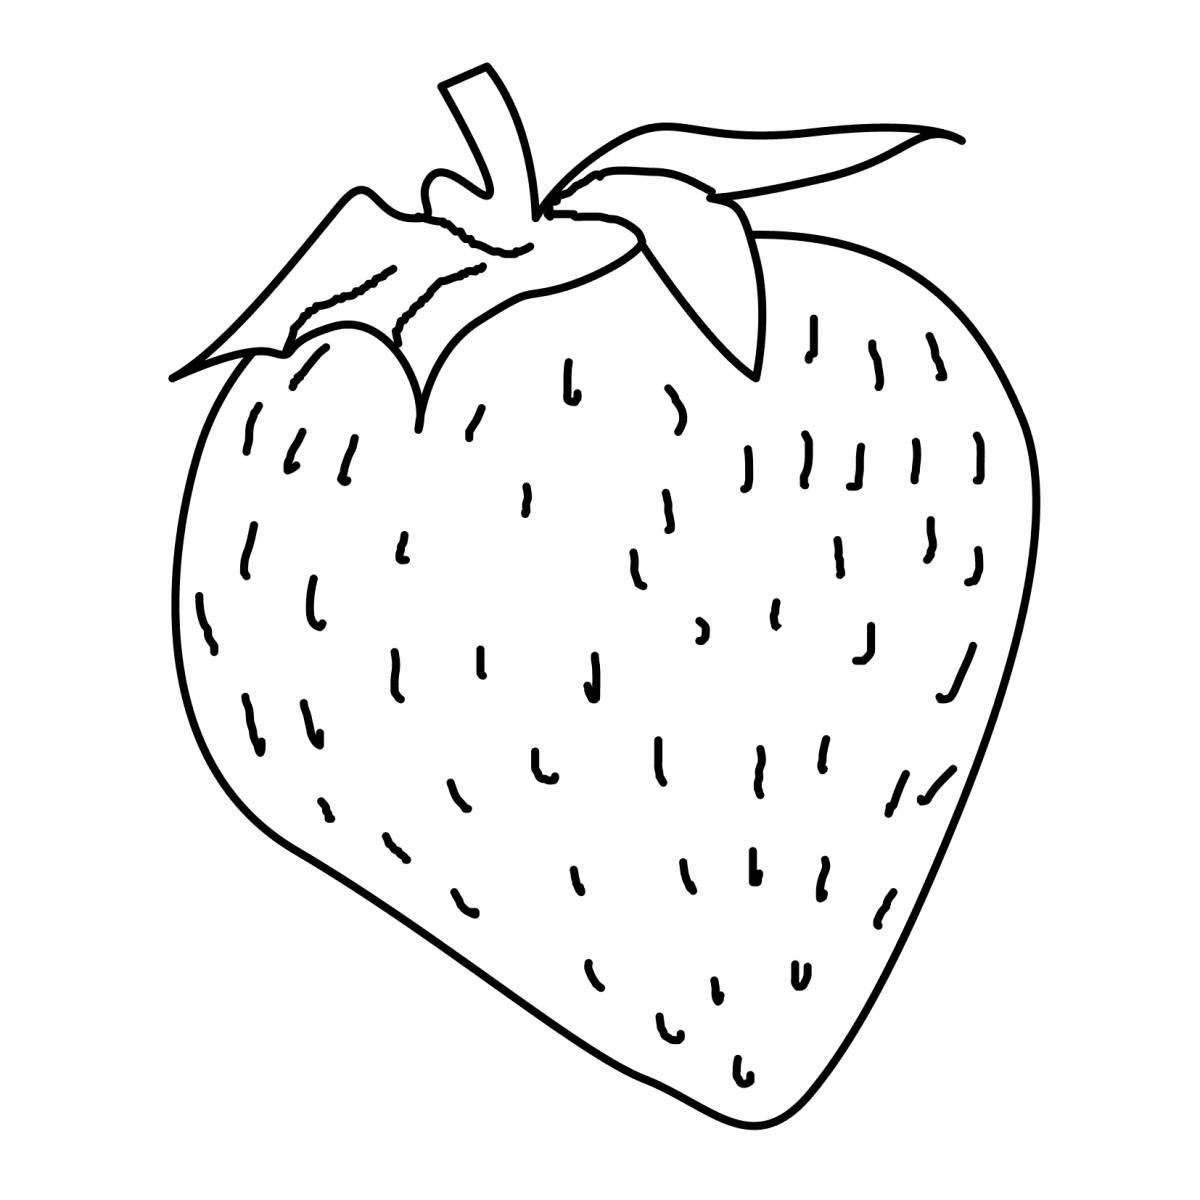 Rampant strawberry coloring book for kids